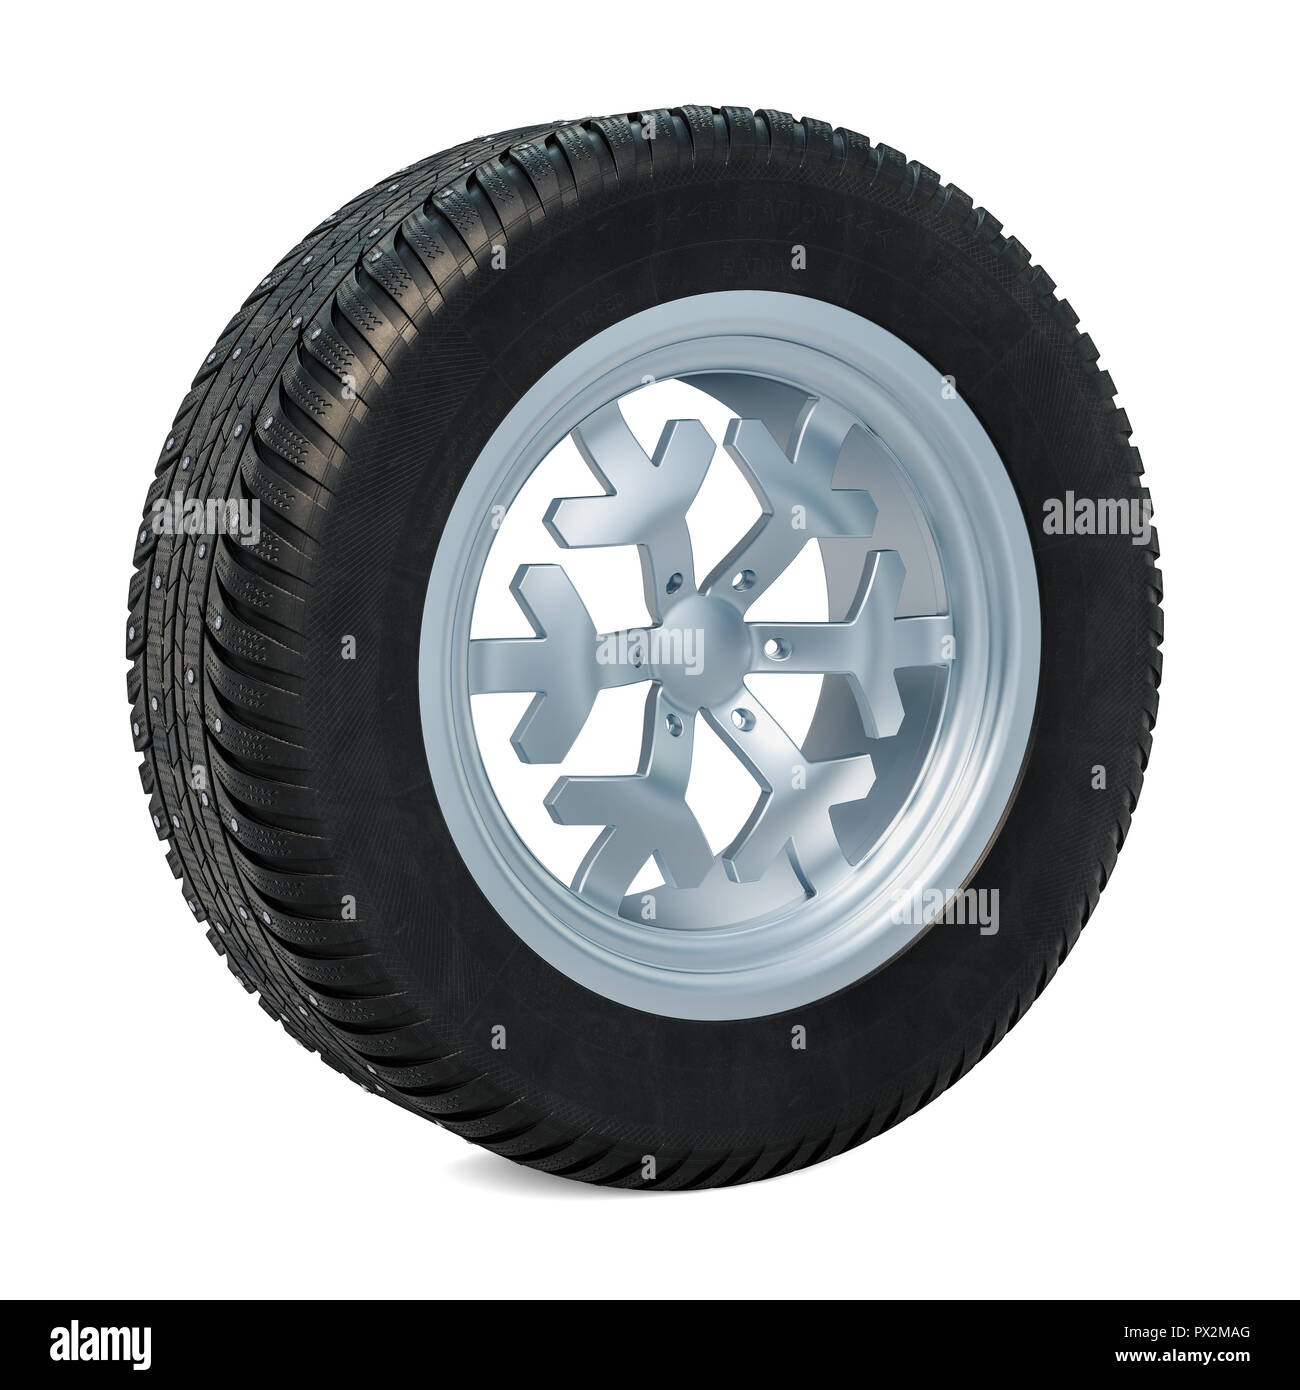 Car wheel with winter studded snow tire. Winter tire concept. 3D rendering isolated on white background Stock Photo